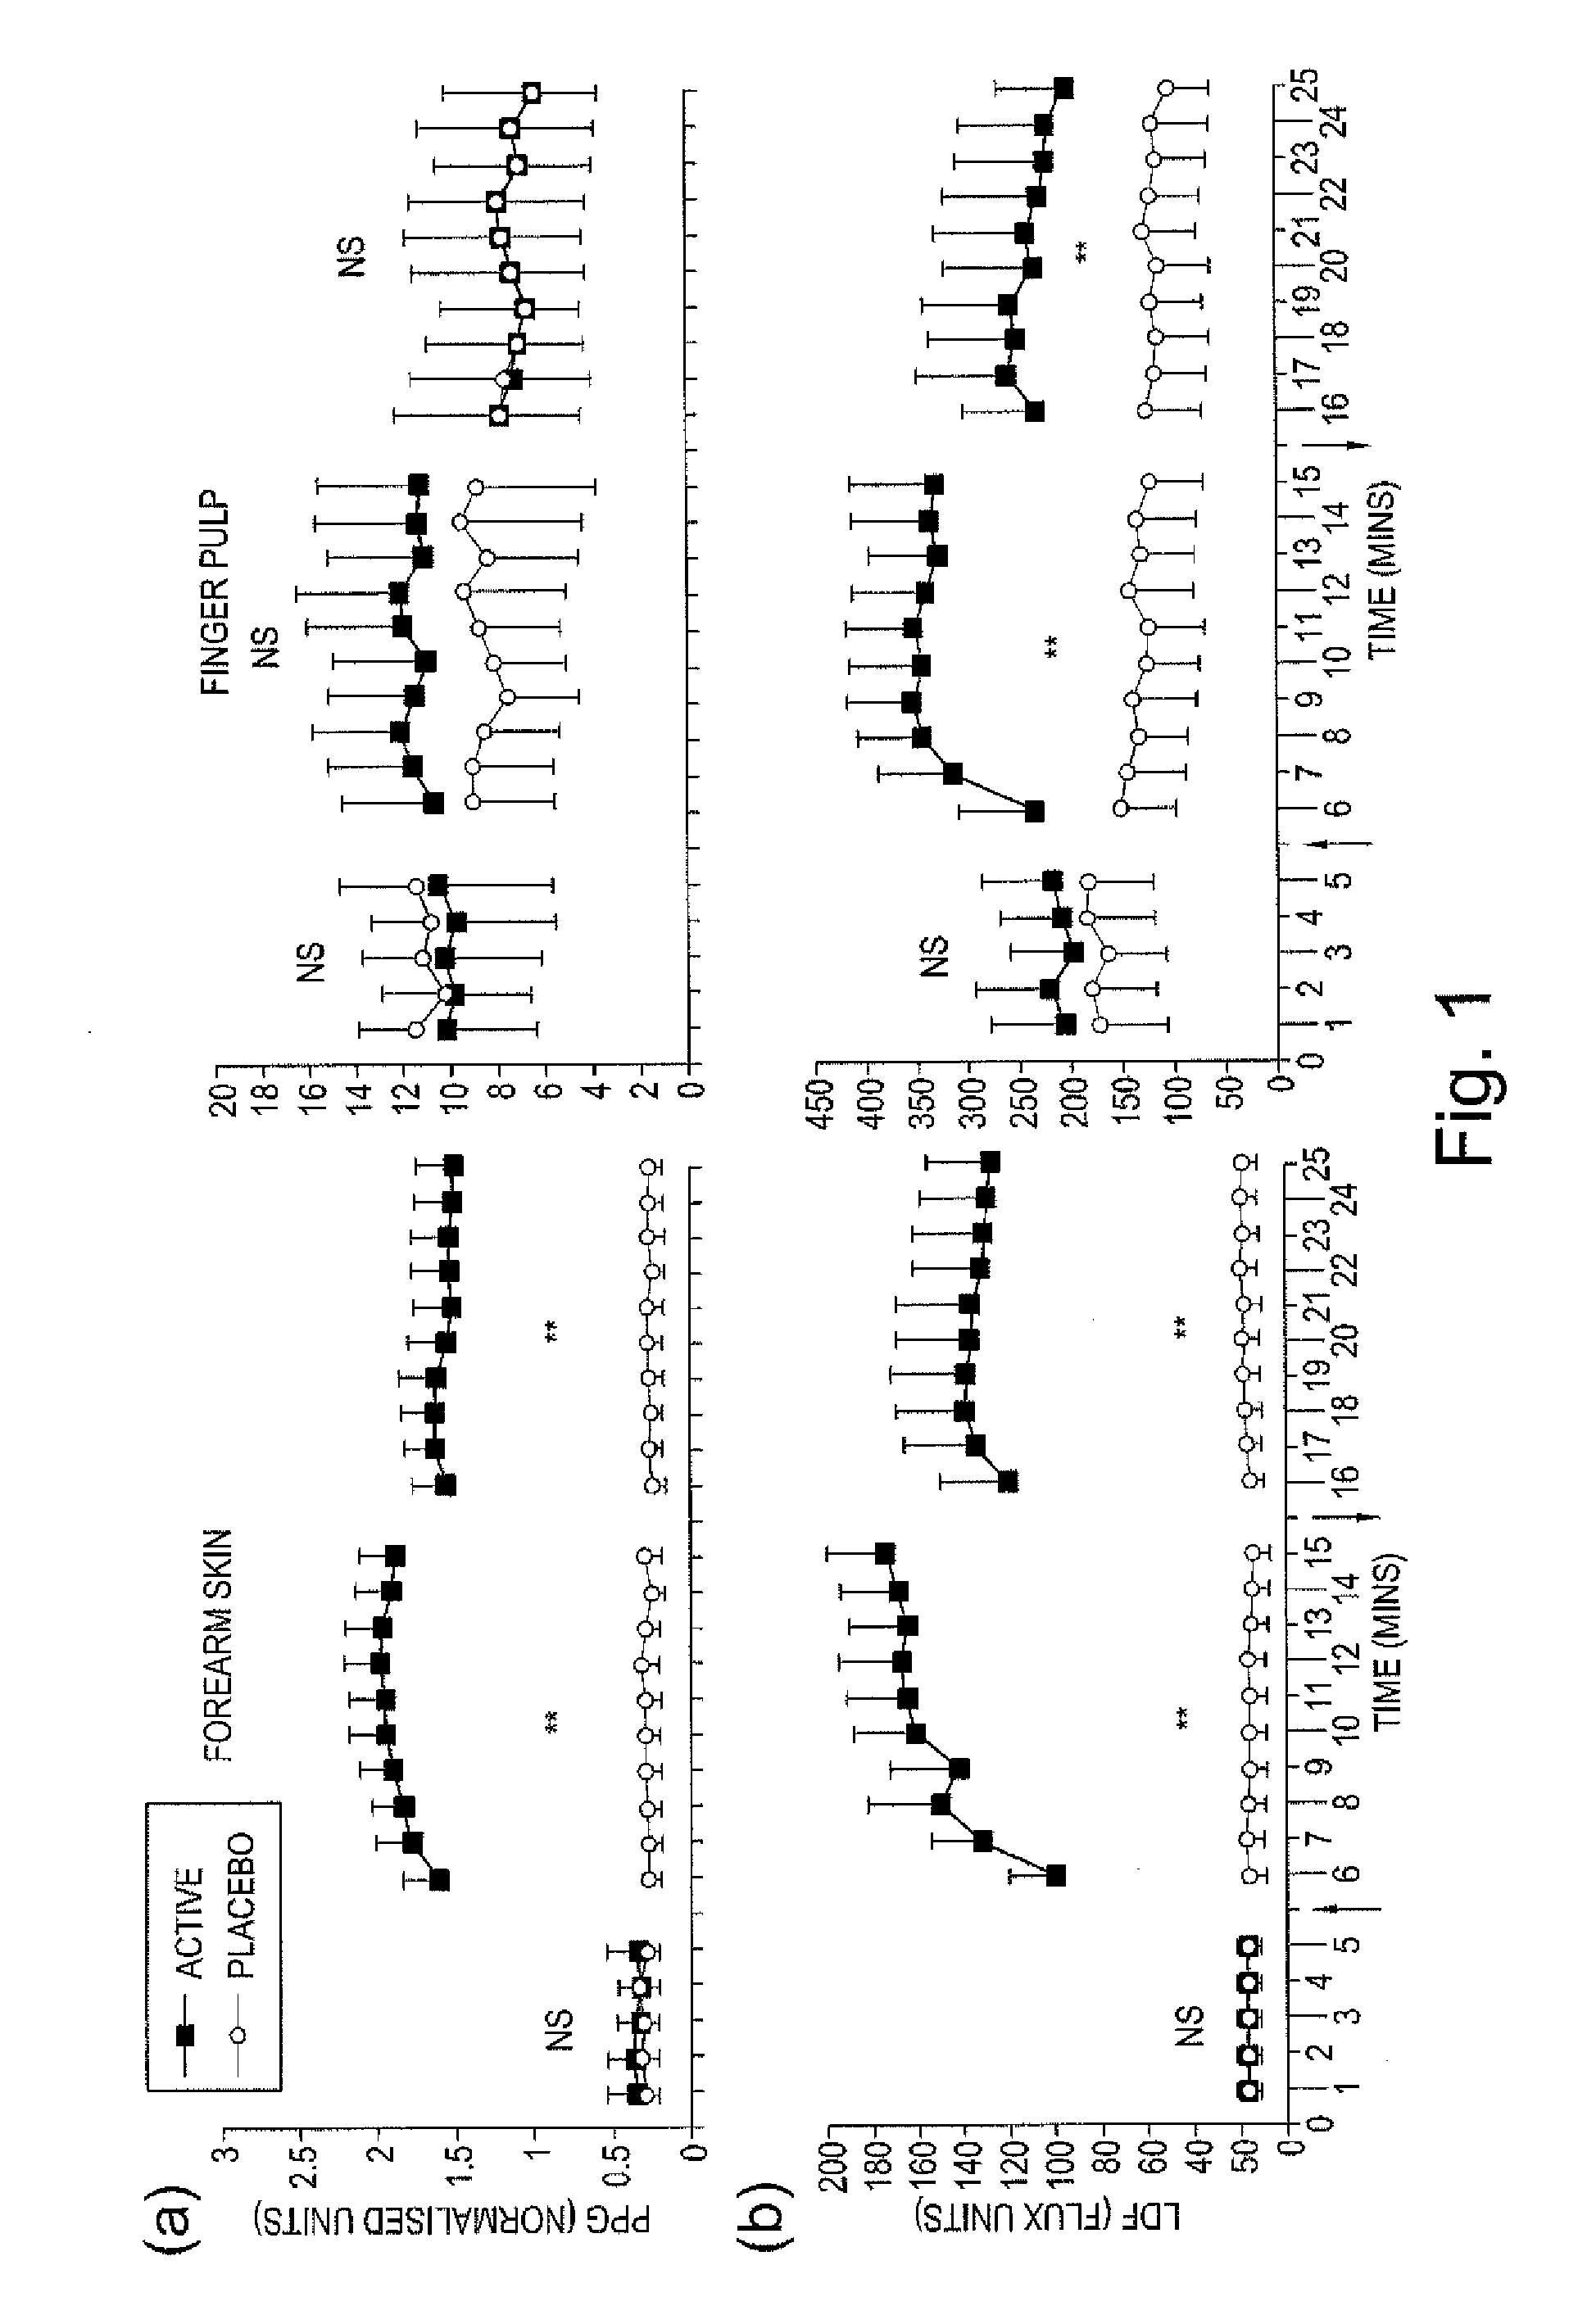 Pharmaceutical composition containing nitrate source and an acidifying agent for treating skin ischaemia